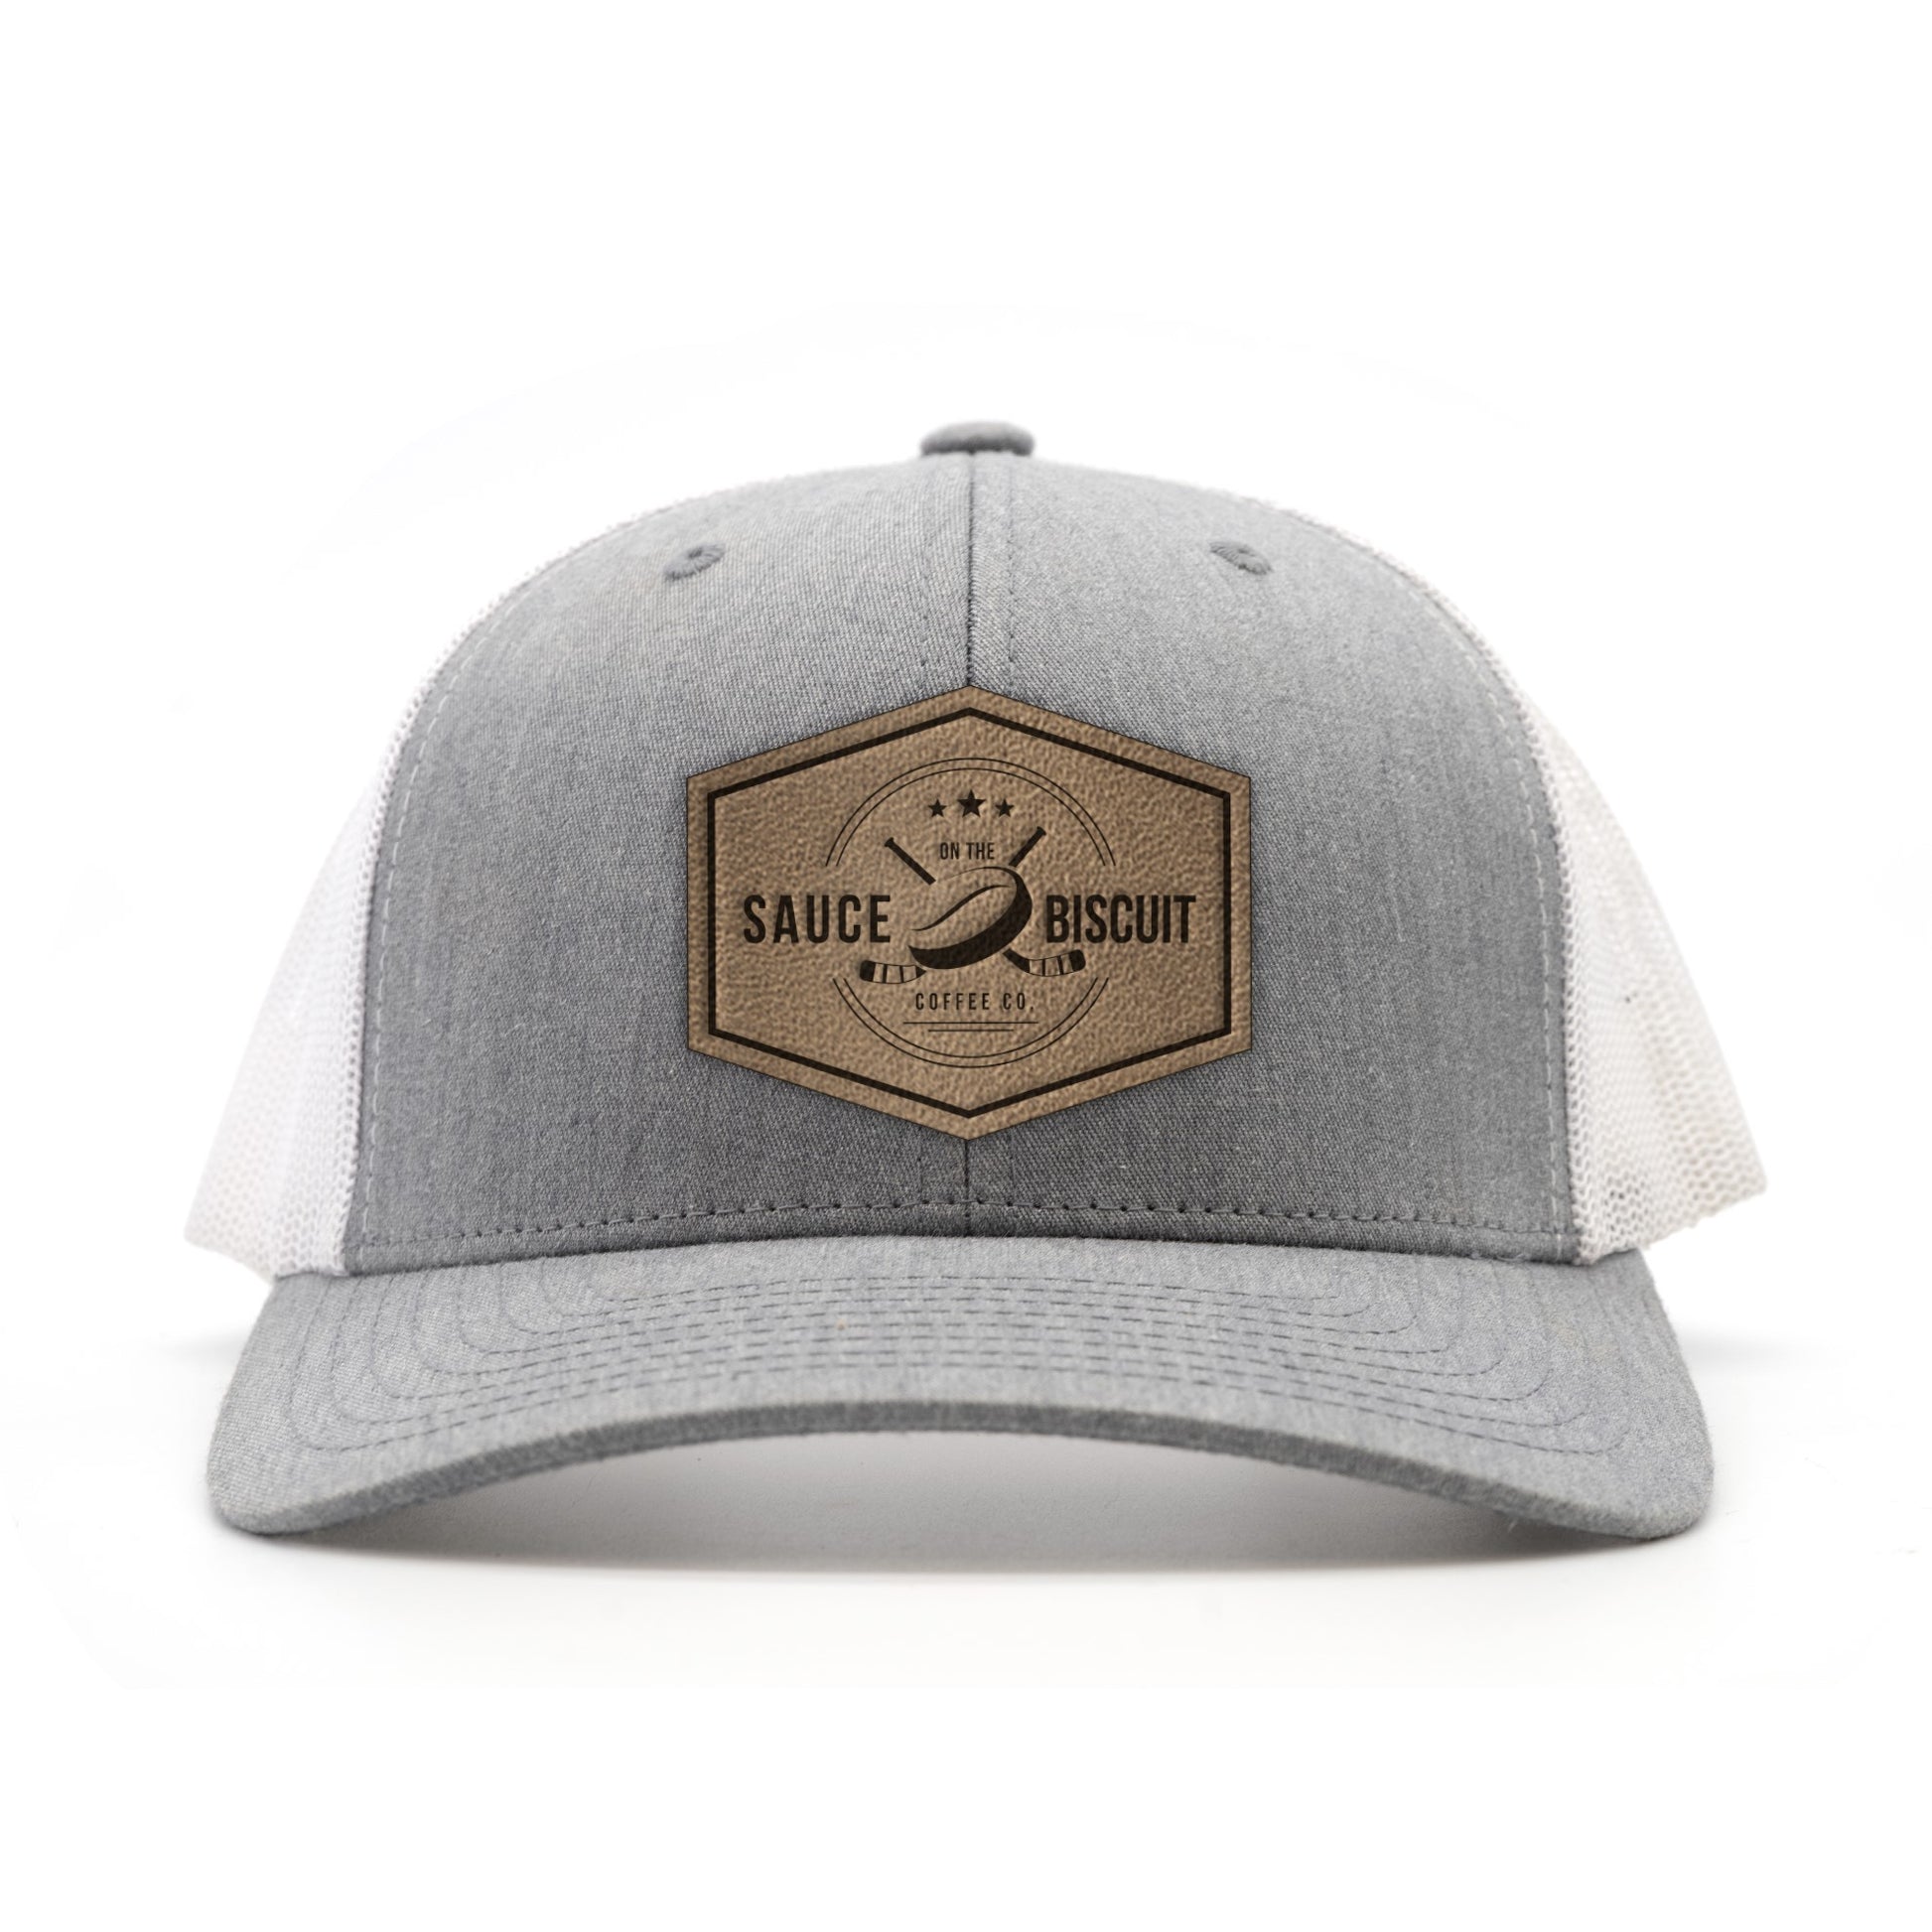 Sauce on the Biscuit Coffee Co. Logo Trucker hat.  Logo stamped into full grain leather patch.